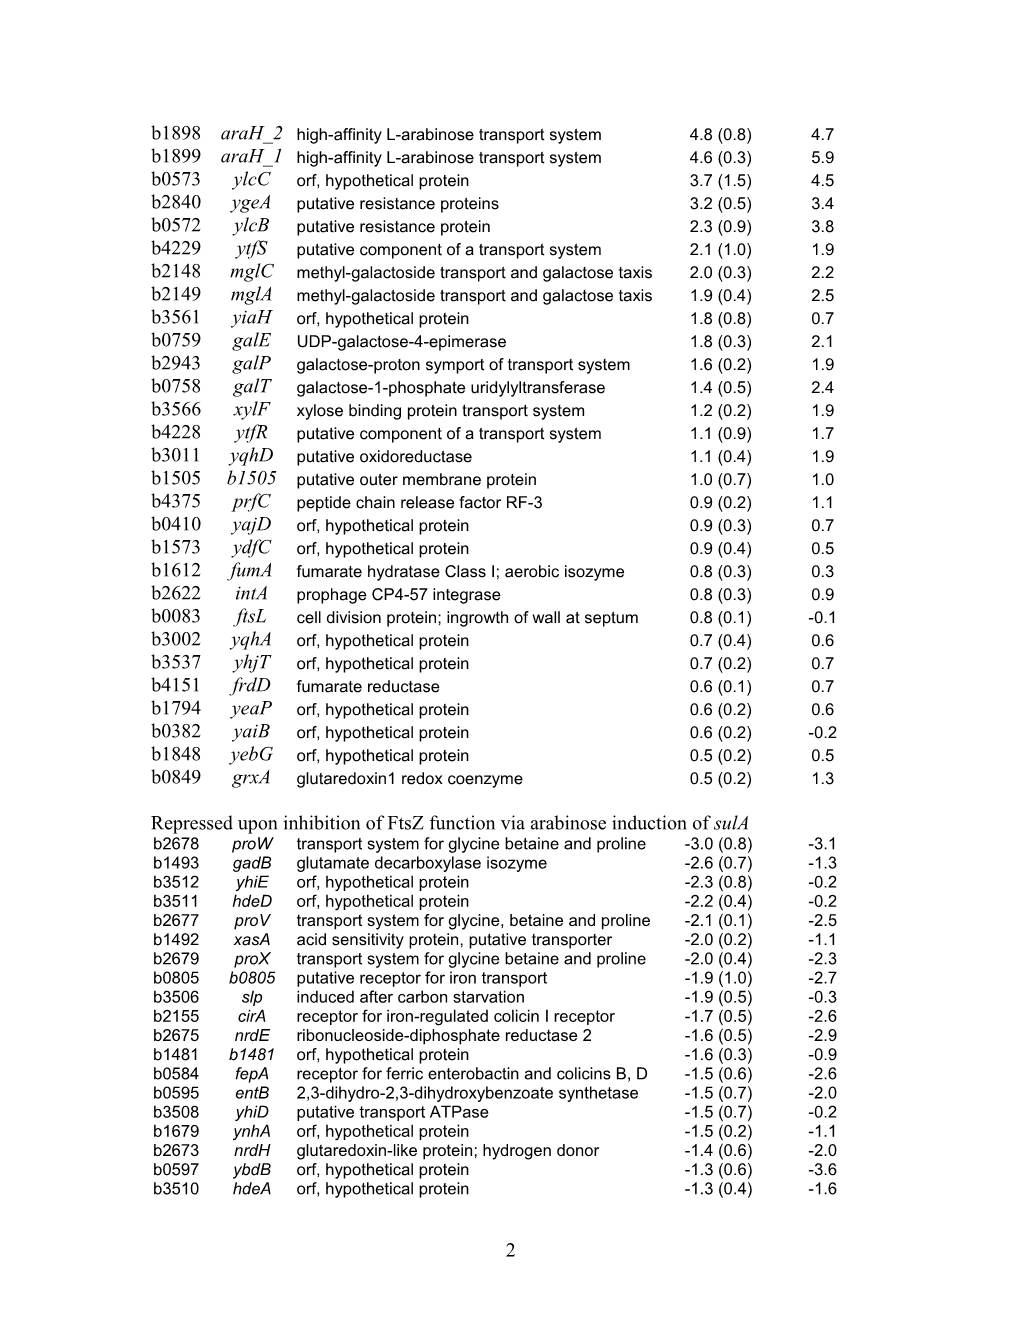 Supplemental Table II. Genes Induced Or Repressed in Filamentous Cellsa